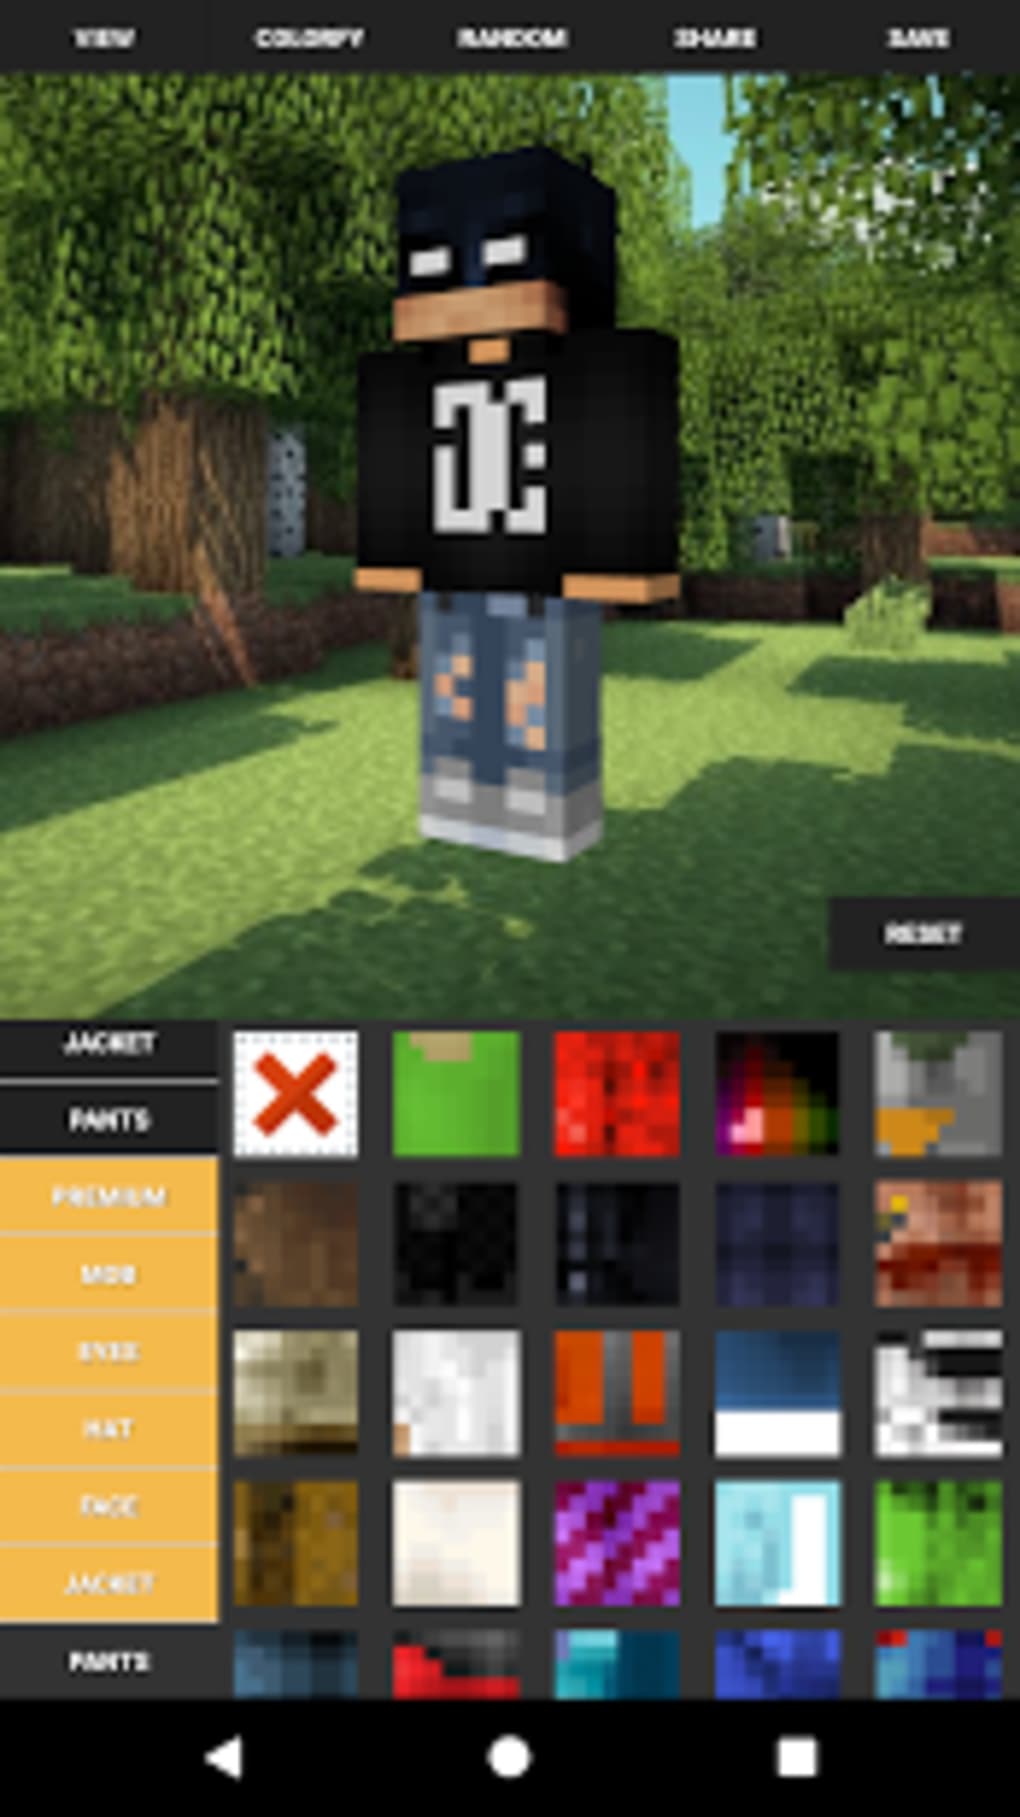 Custom Skin Creator For Minecraft 17.9 APK download free for android